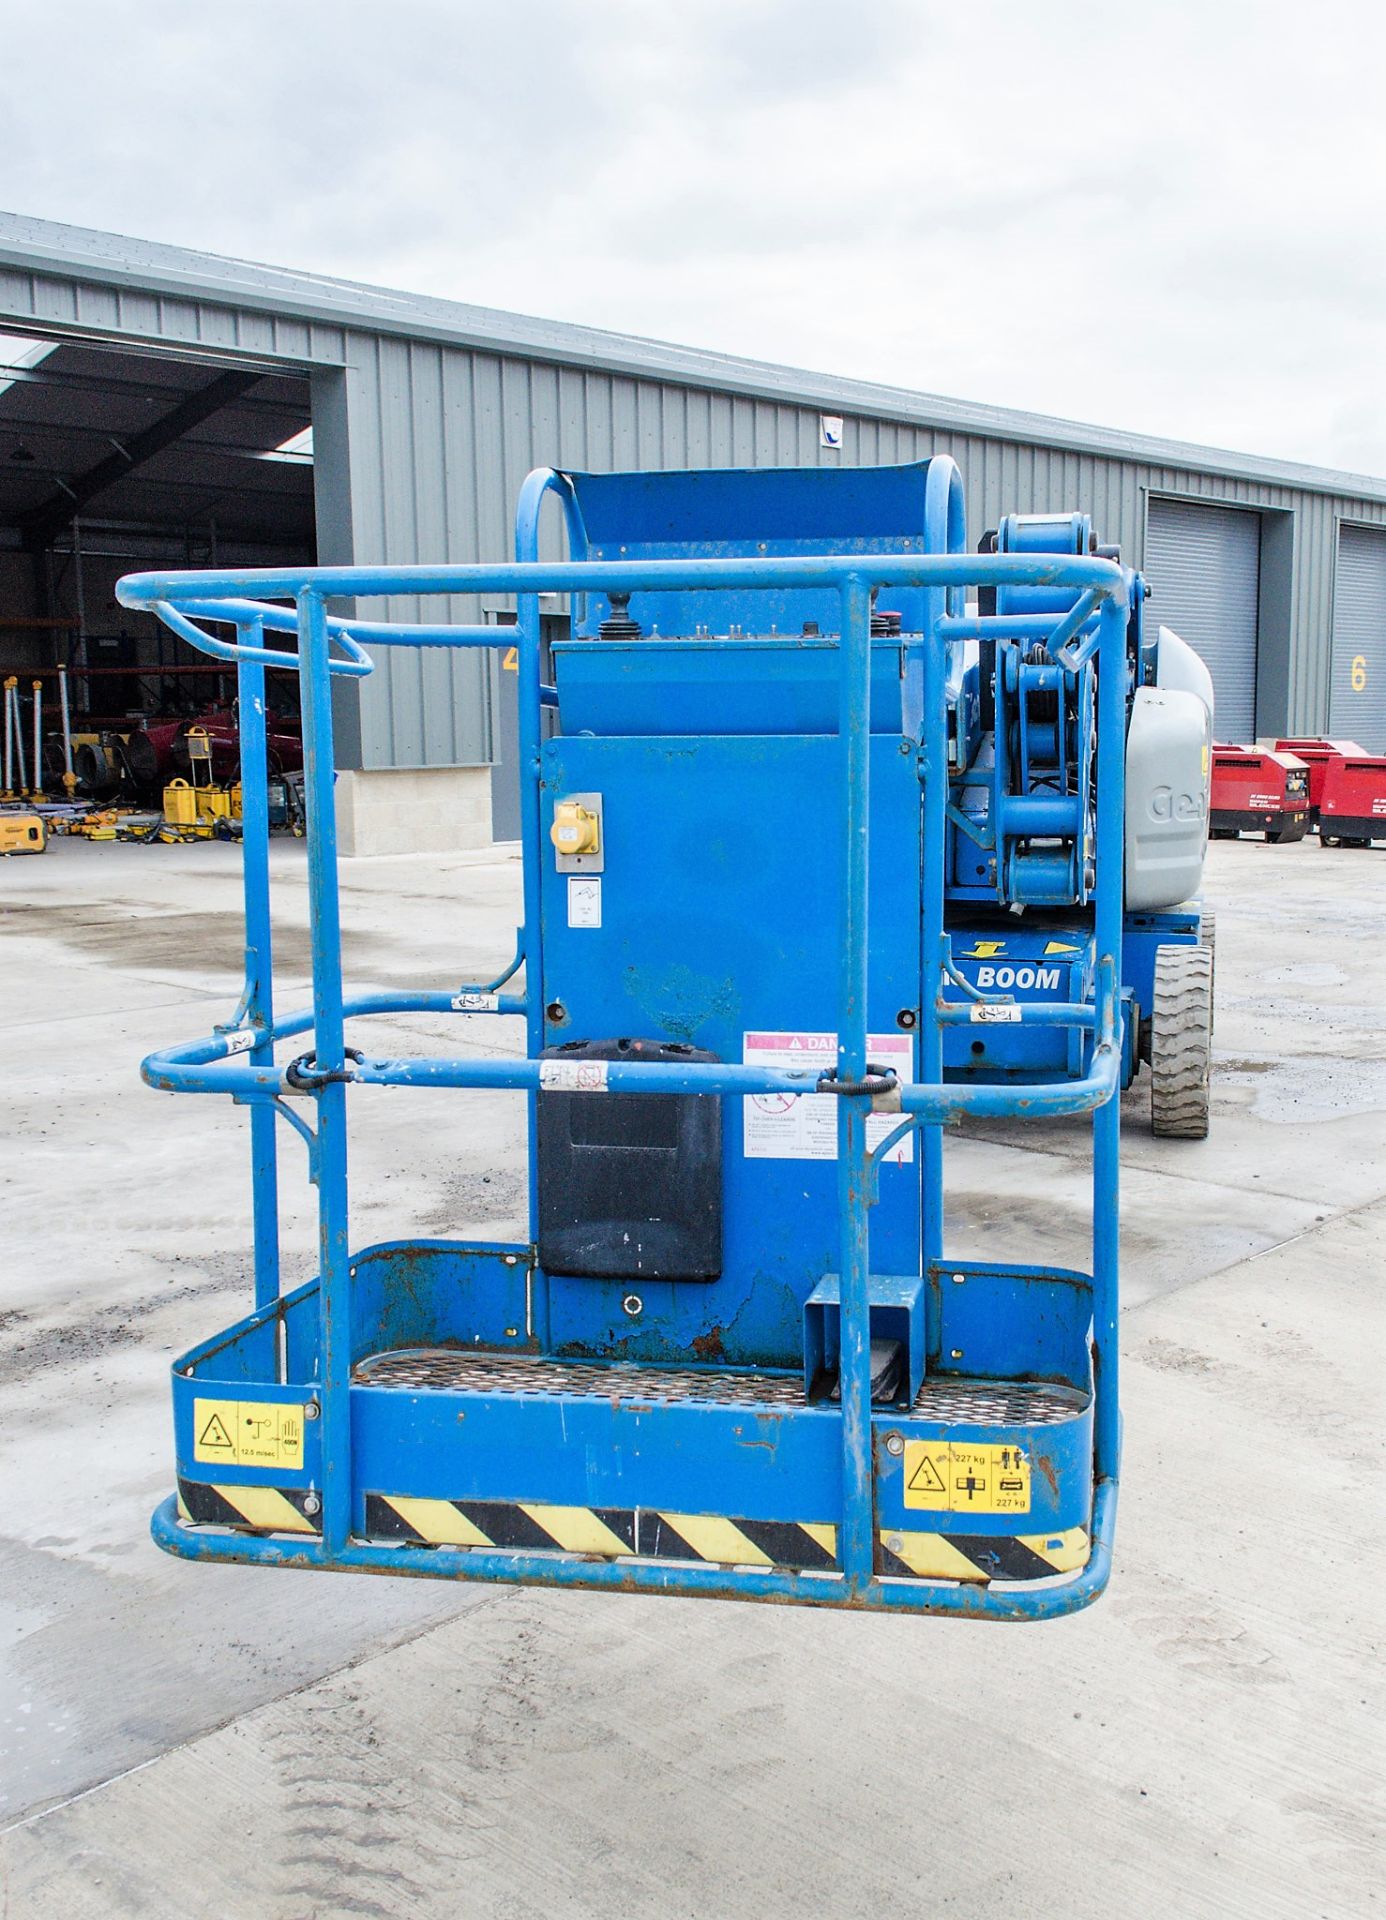 Genie Z40/23N RJ battery electric articulated boom access platform Year: 2014 S/N: Z40N14-2561 - Image 5 of 13